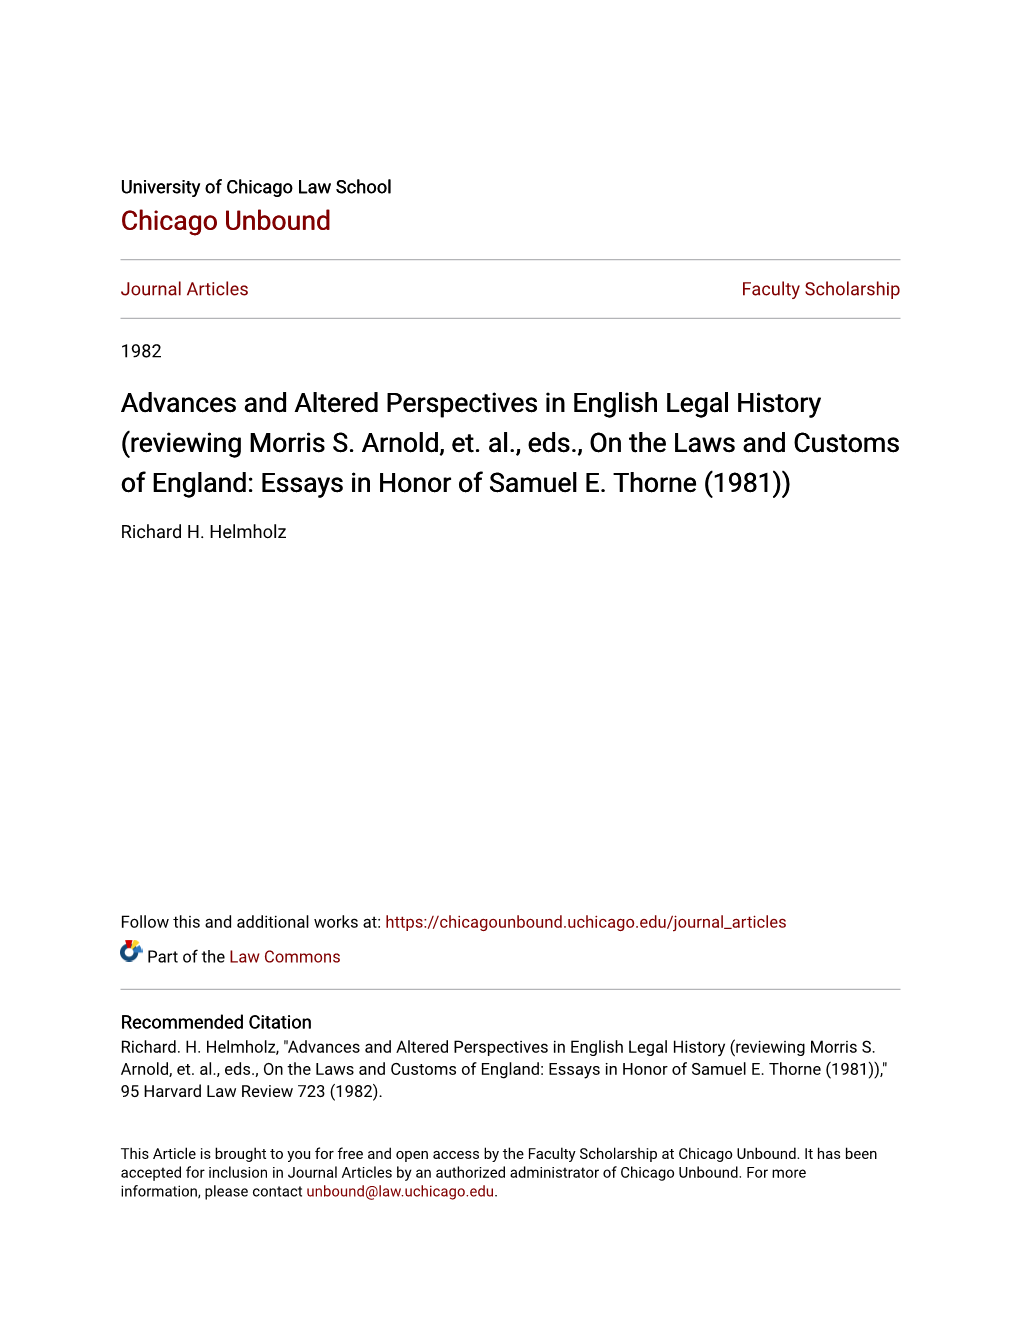 Reviewing Morris S. Arnold, Et. Al., Eds., on the Laws and Customs of England: Essays in Honor of Samuel E